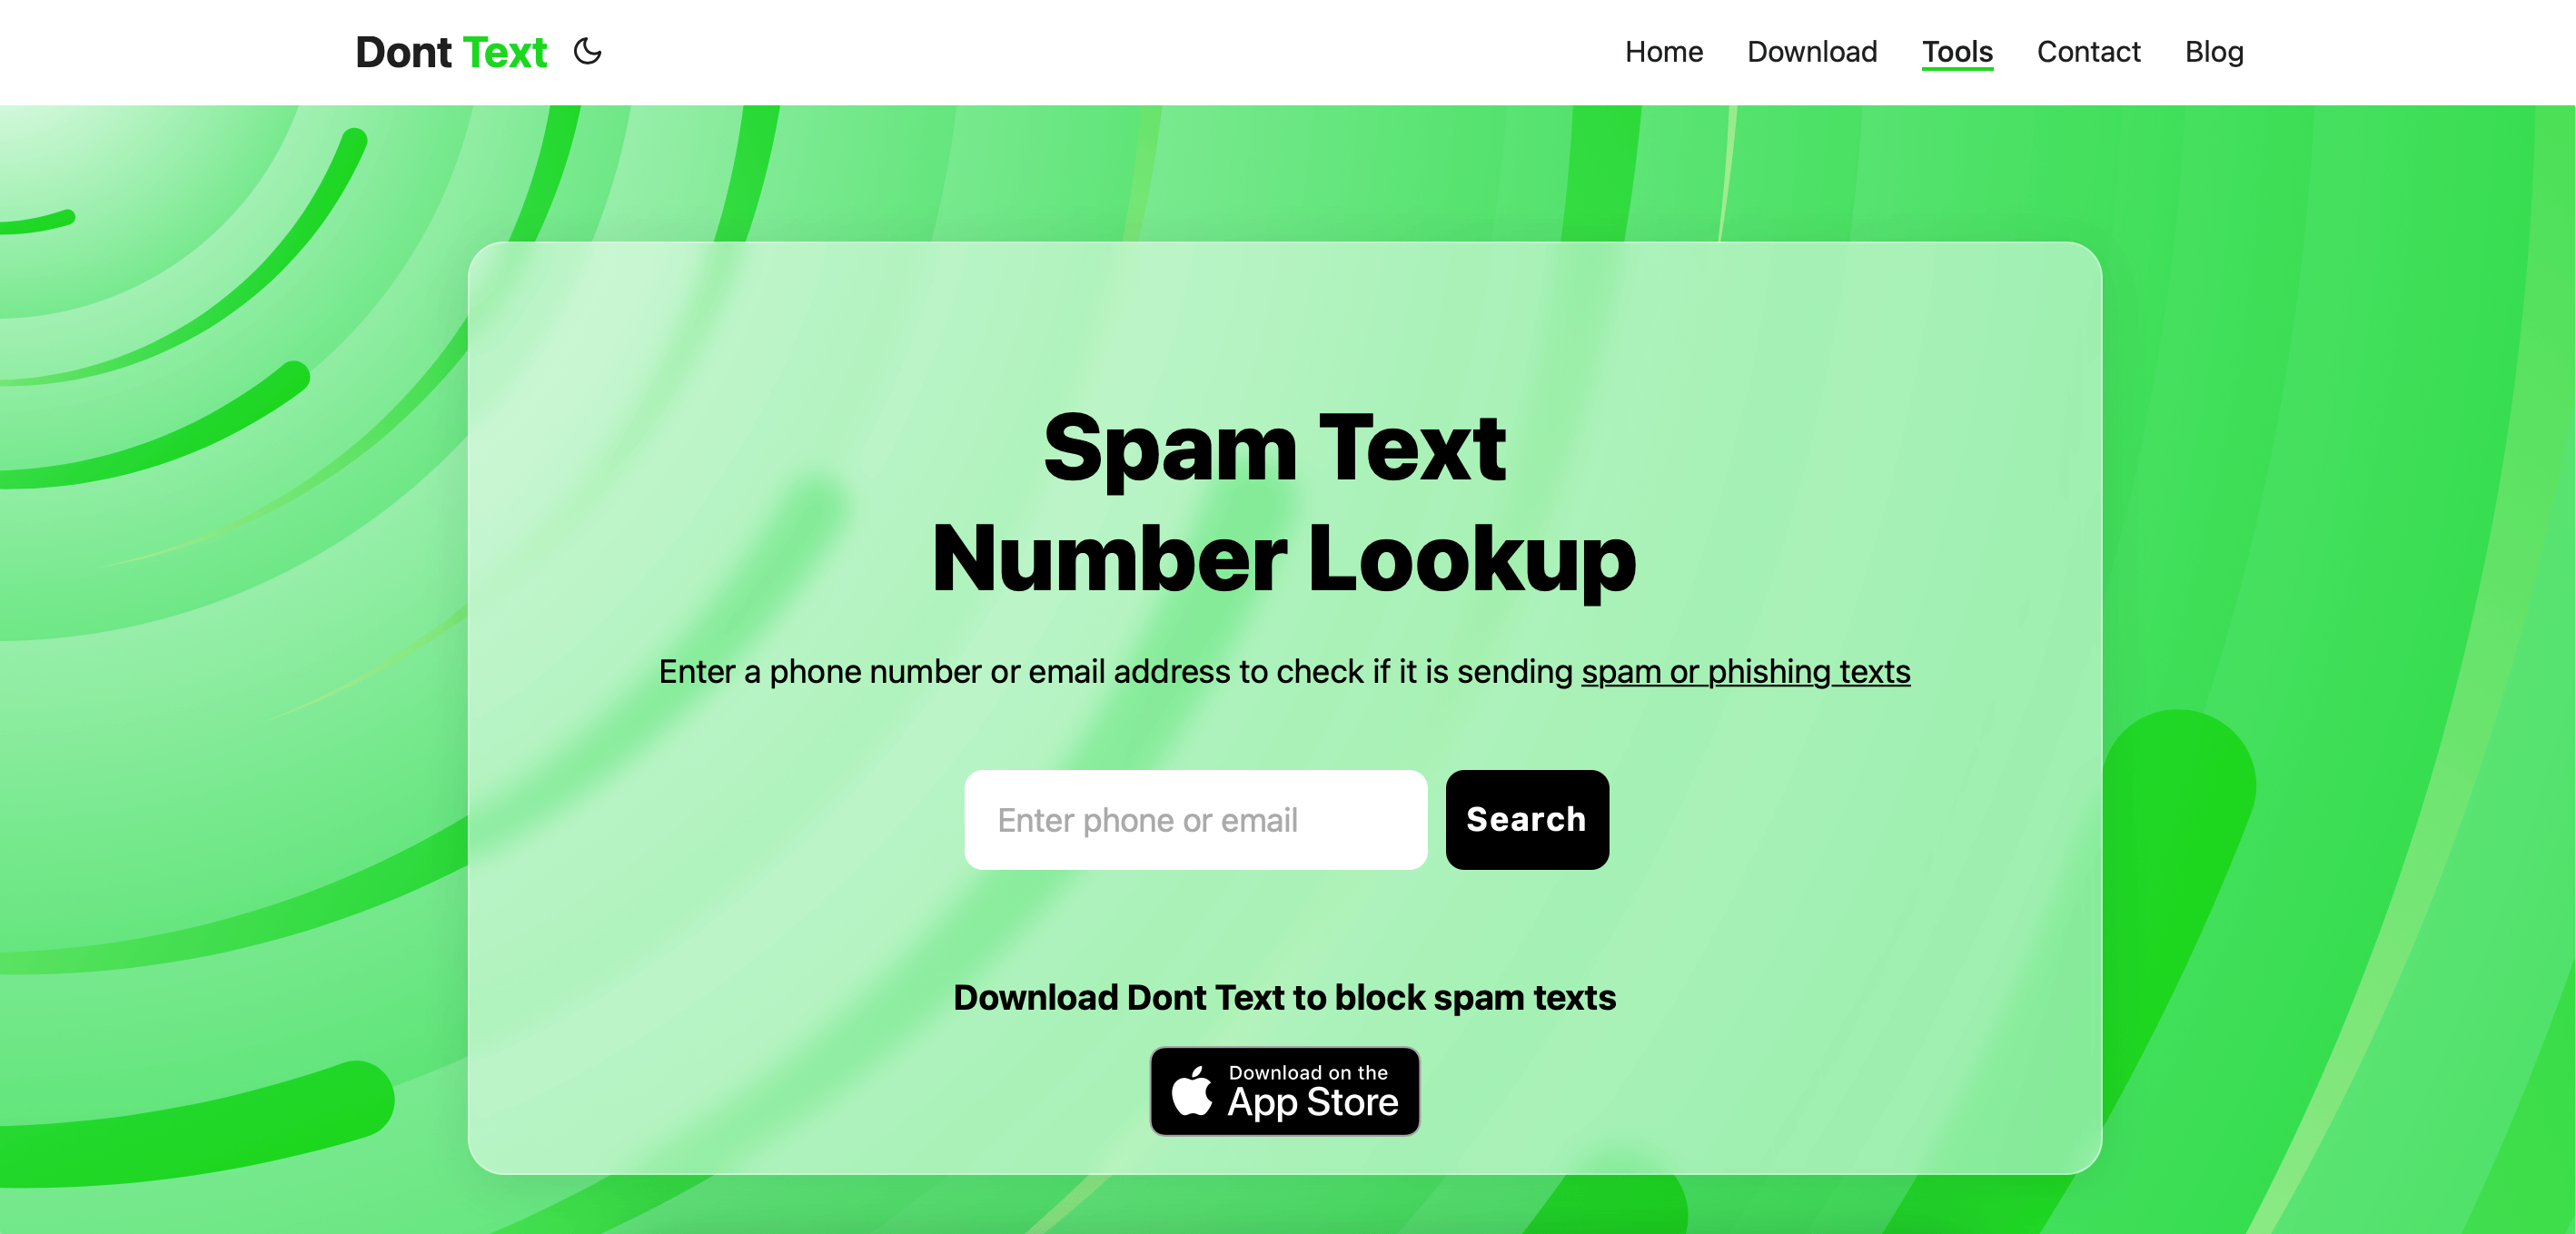 Spam Text Number Lookup Tool